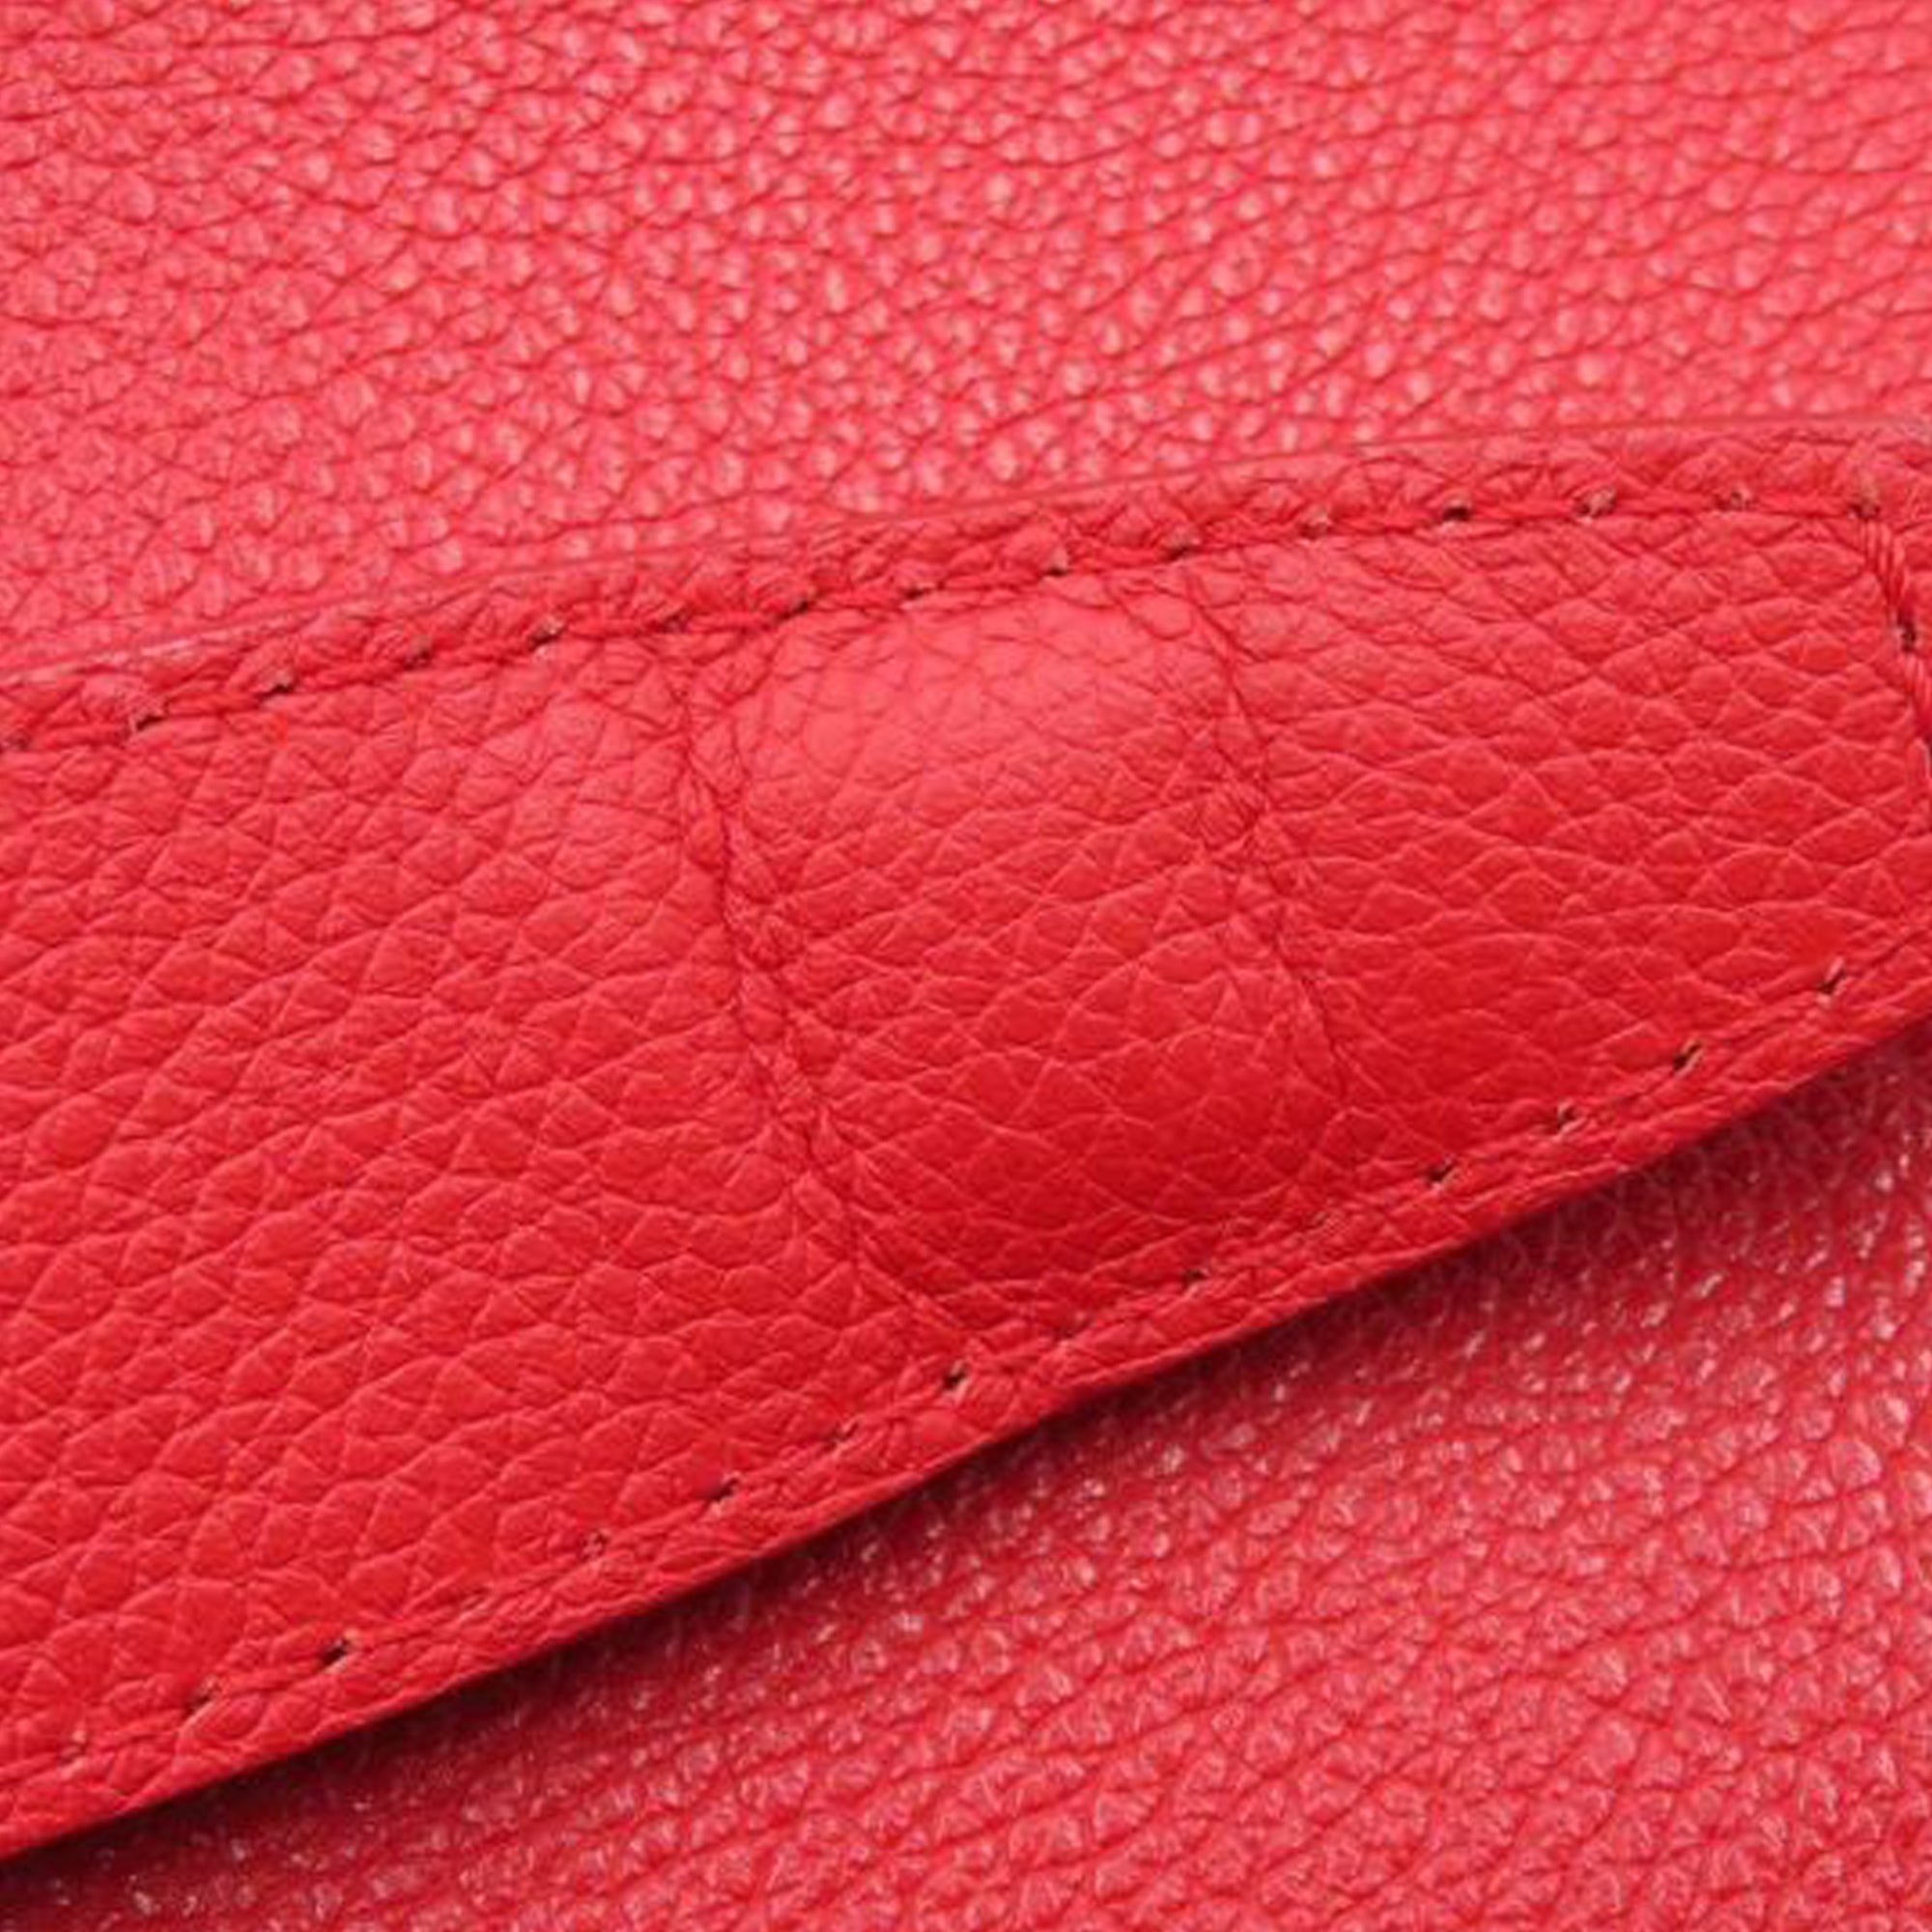 Louis Vuitton Lockme Ii Bb Red Leather Shoulder Bag (Pre-Owned